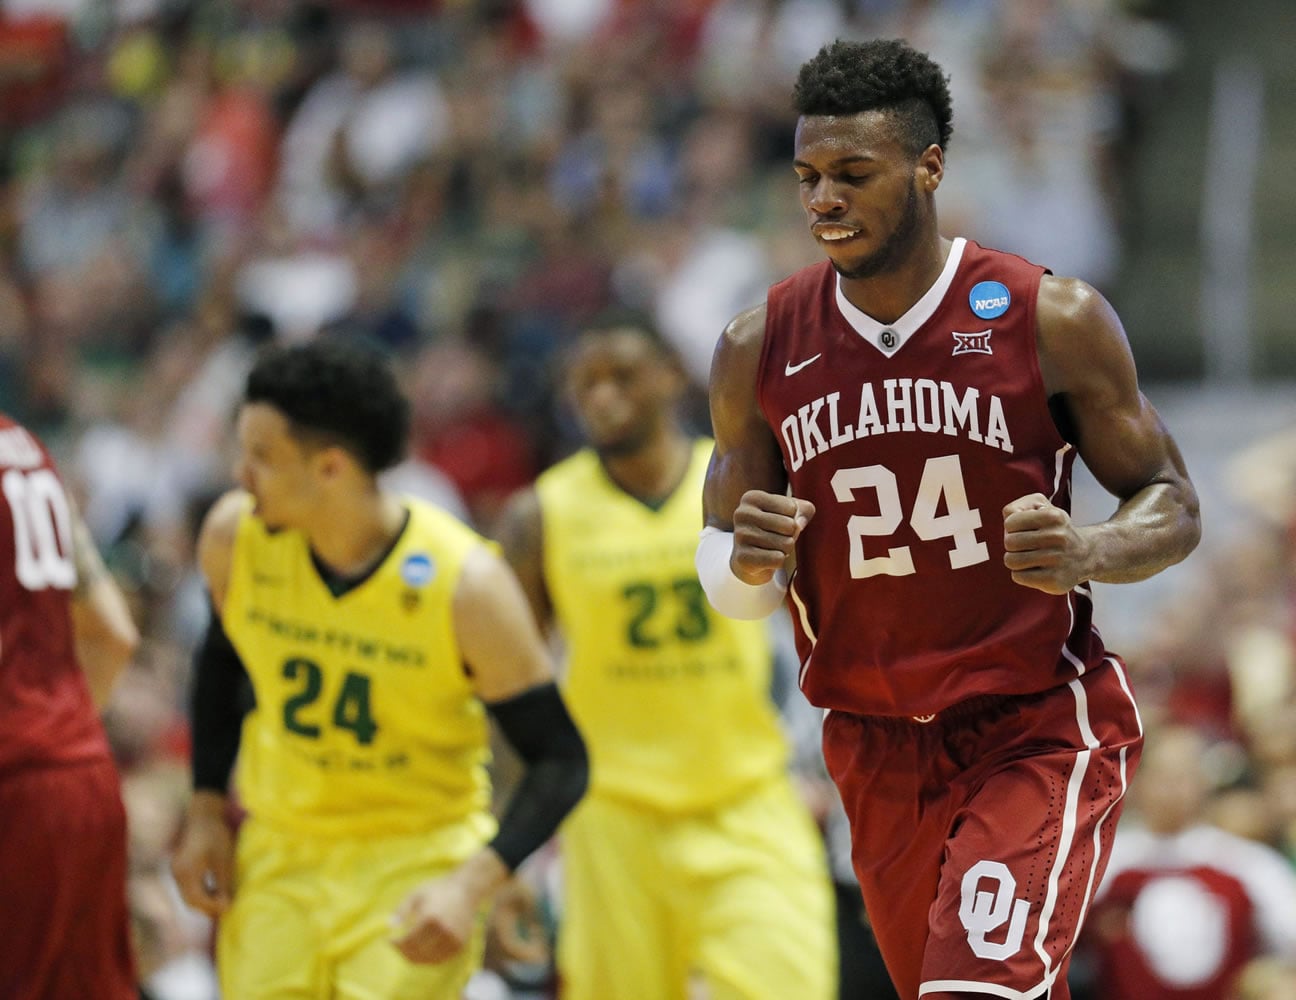 Oklahoma guard Buddy Hield celebrates after scoring during the second half of an NCAA college basketball game against Oregon in the regional finals of the NCAA Tournament, Saturday, March 26, 2016, in Anaheim, Calif.